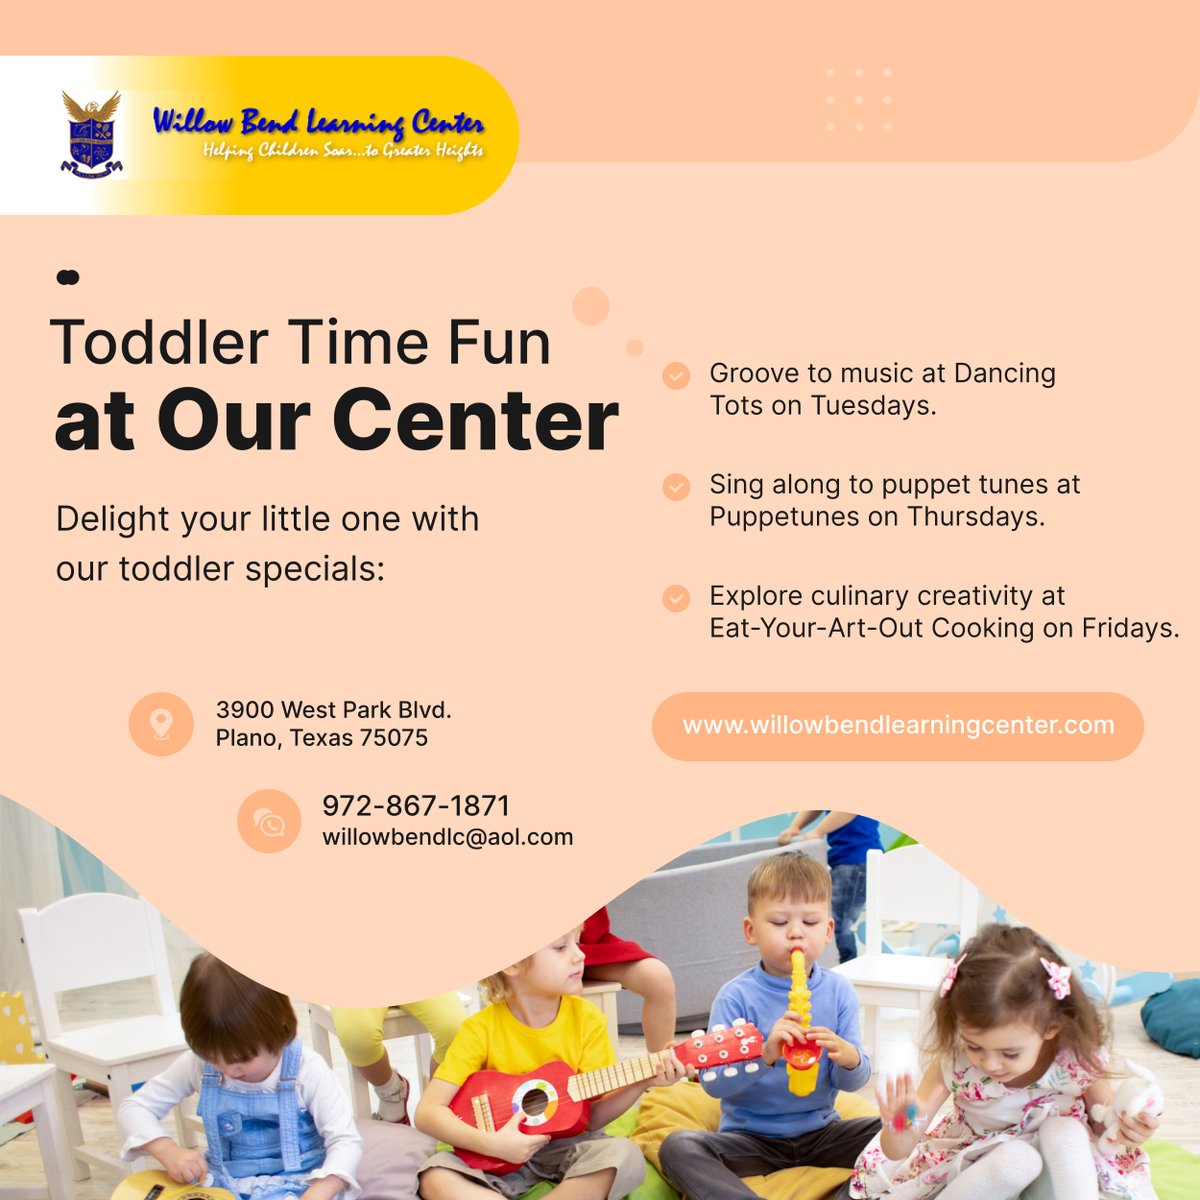 Experience engaging activities tailored for toddlers at Willow Bend Learning Center. From dance to cooking, there's something exciting every day! 

#ToddlerActivities #ToddlerSpecials #FunLearning #Preschool #PlanoTX